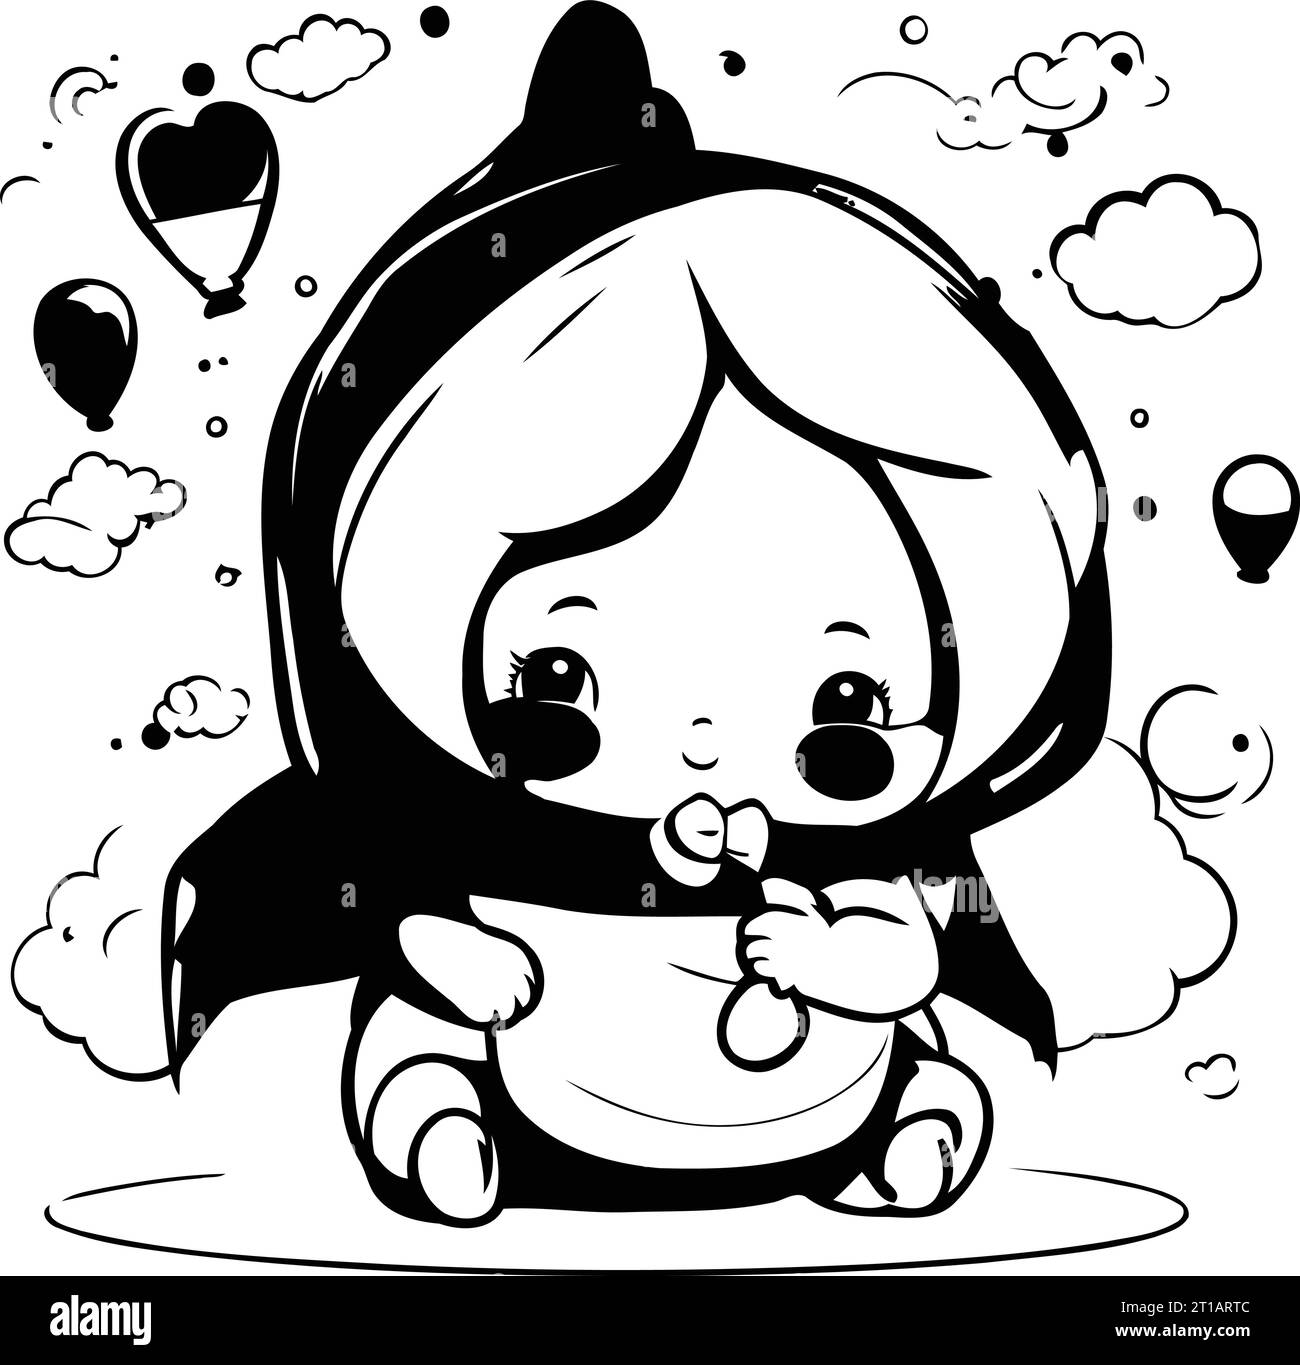 Black and White Cartoon Illustration of Cute Little Baby Boy or Girl Wearing Hoodie and Flying Balloons for Coloring Book Stock Vector